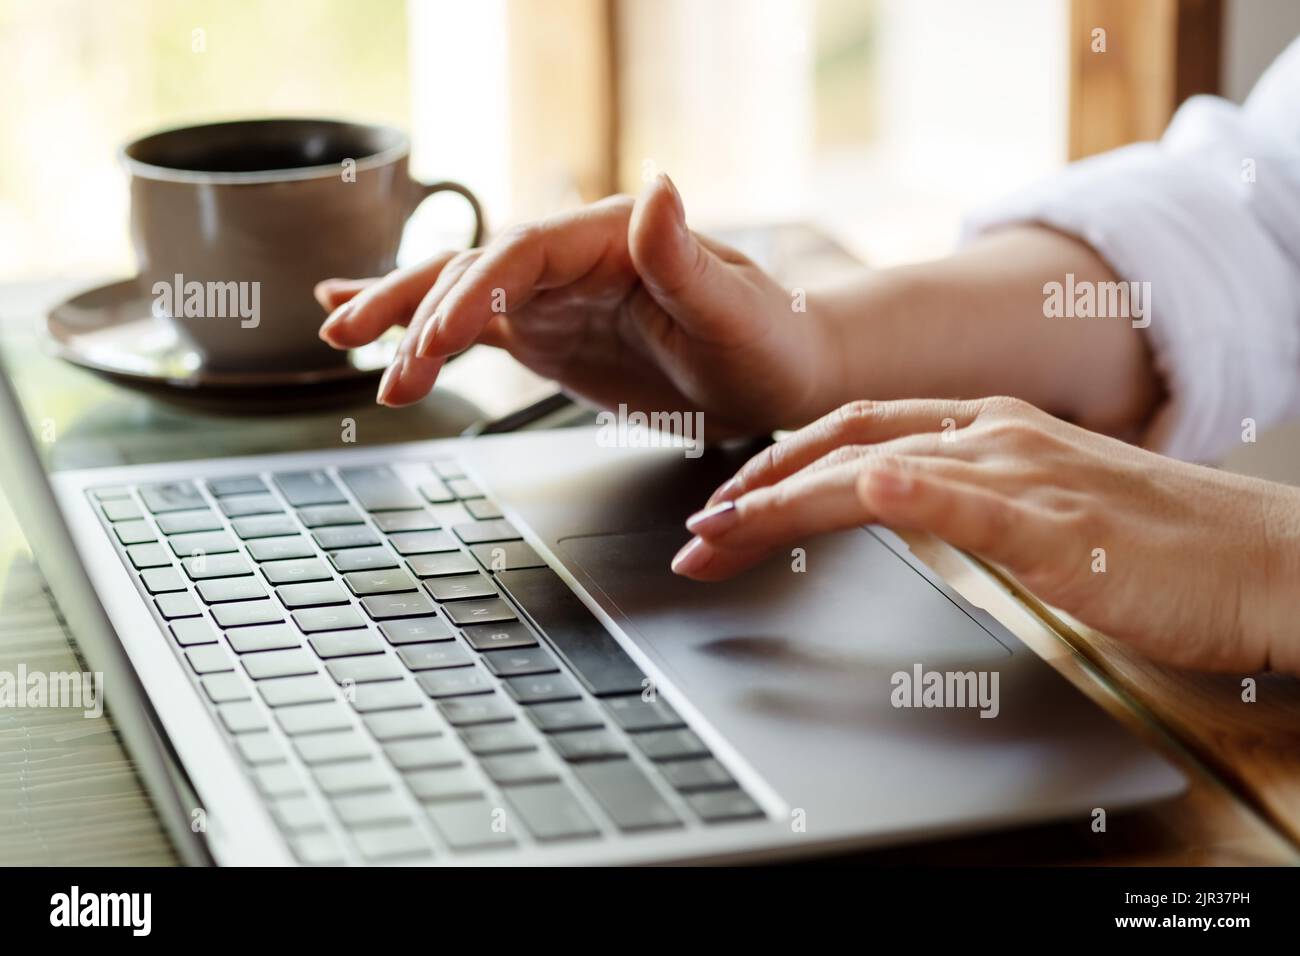 Close up image of woman hands typing on laptop computer keyboard and surfing the internet on office table, online, working, business and technology, internet network communication concept.  Stock Photo